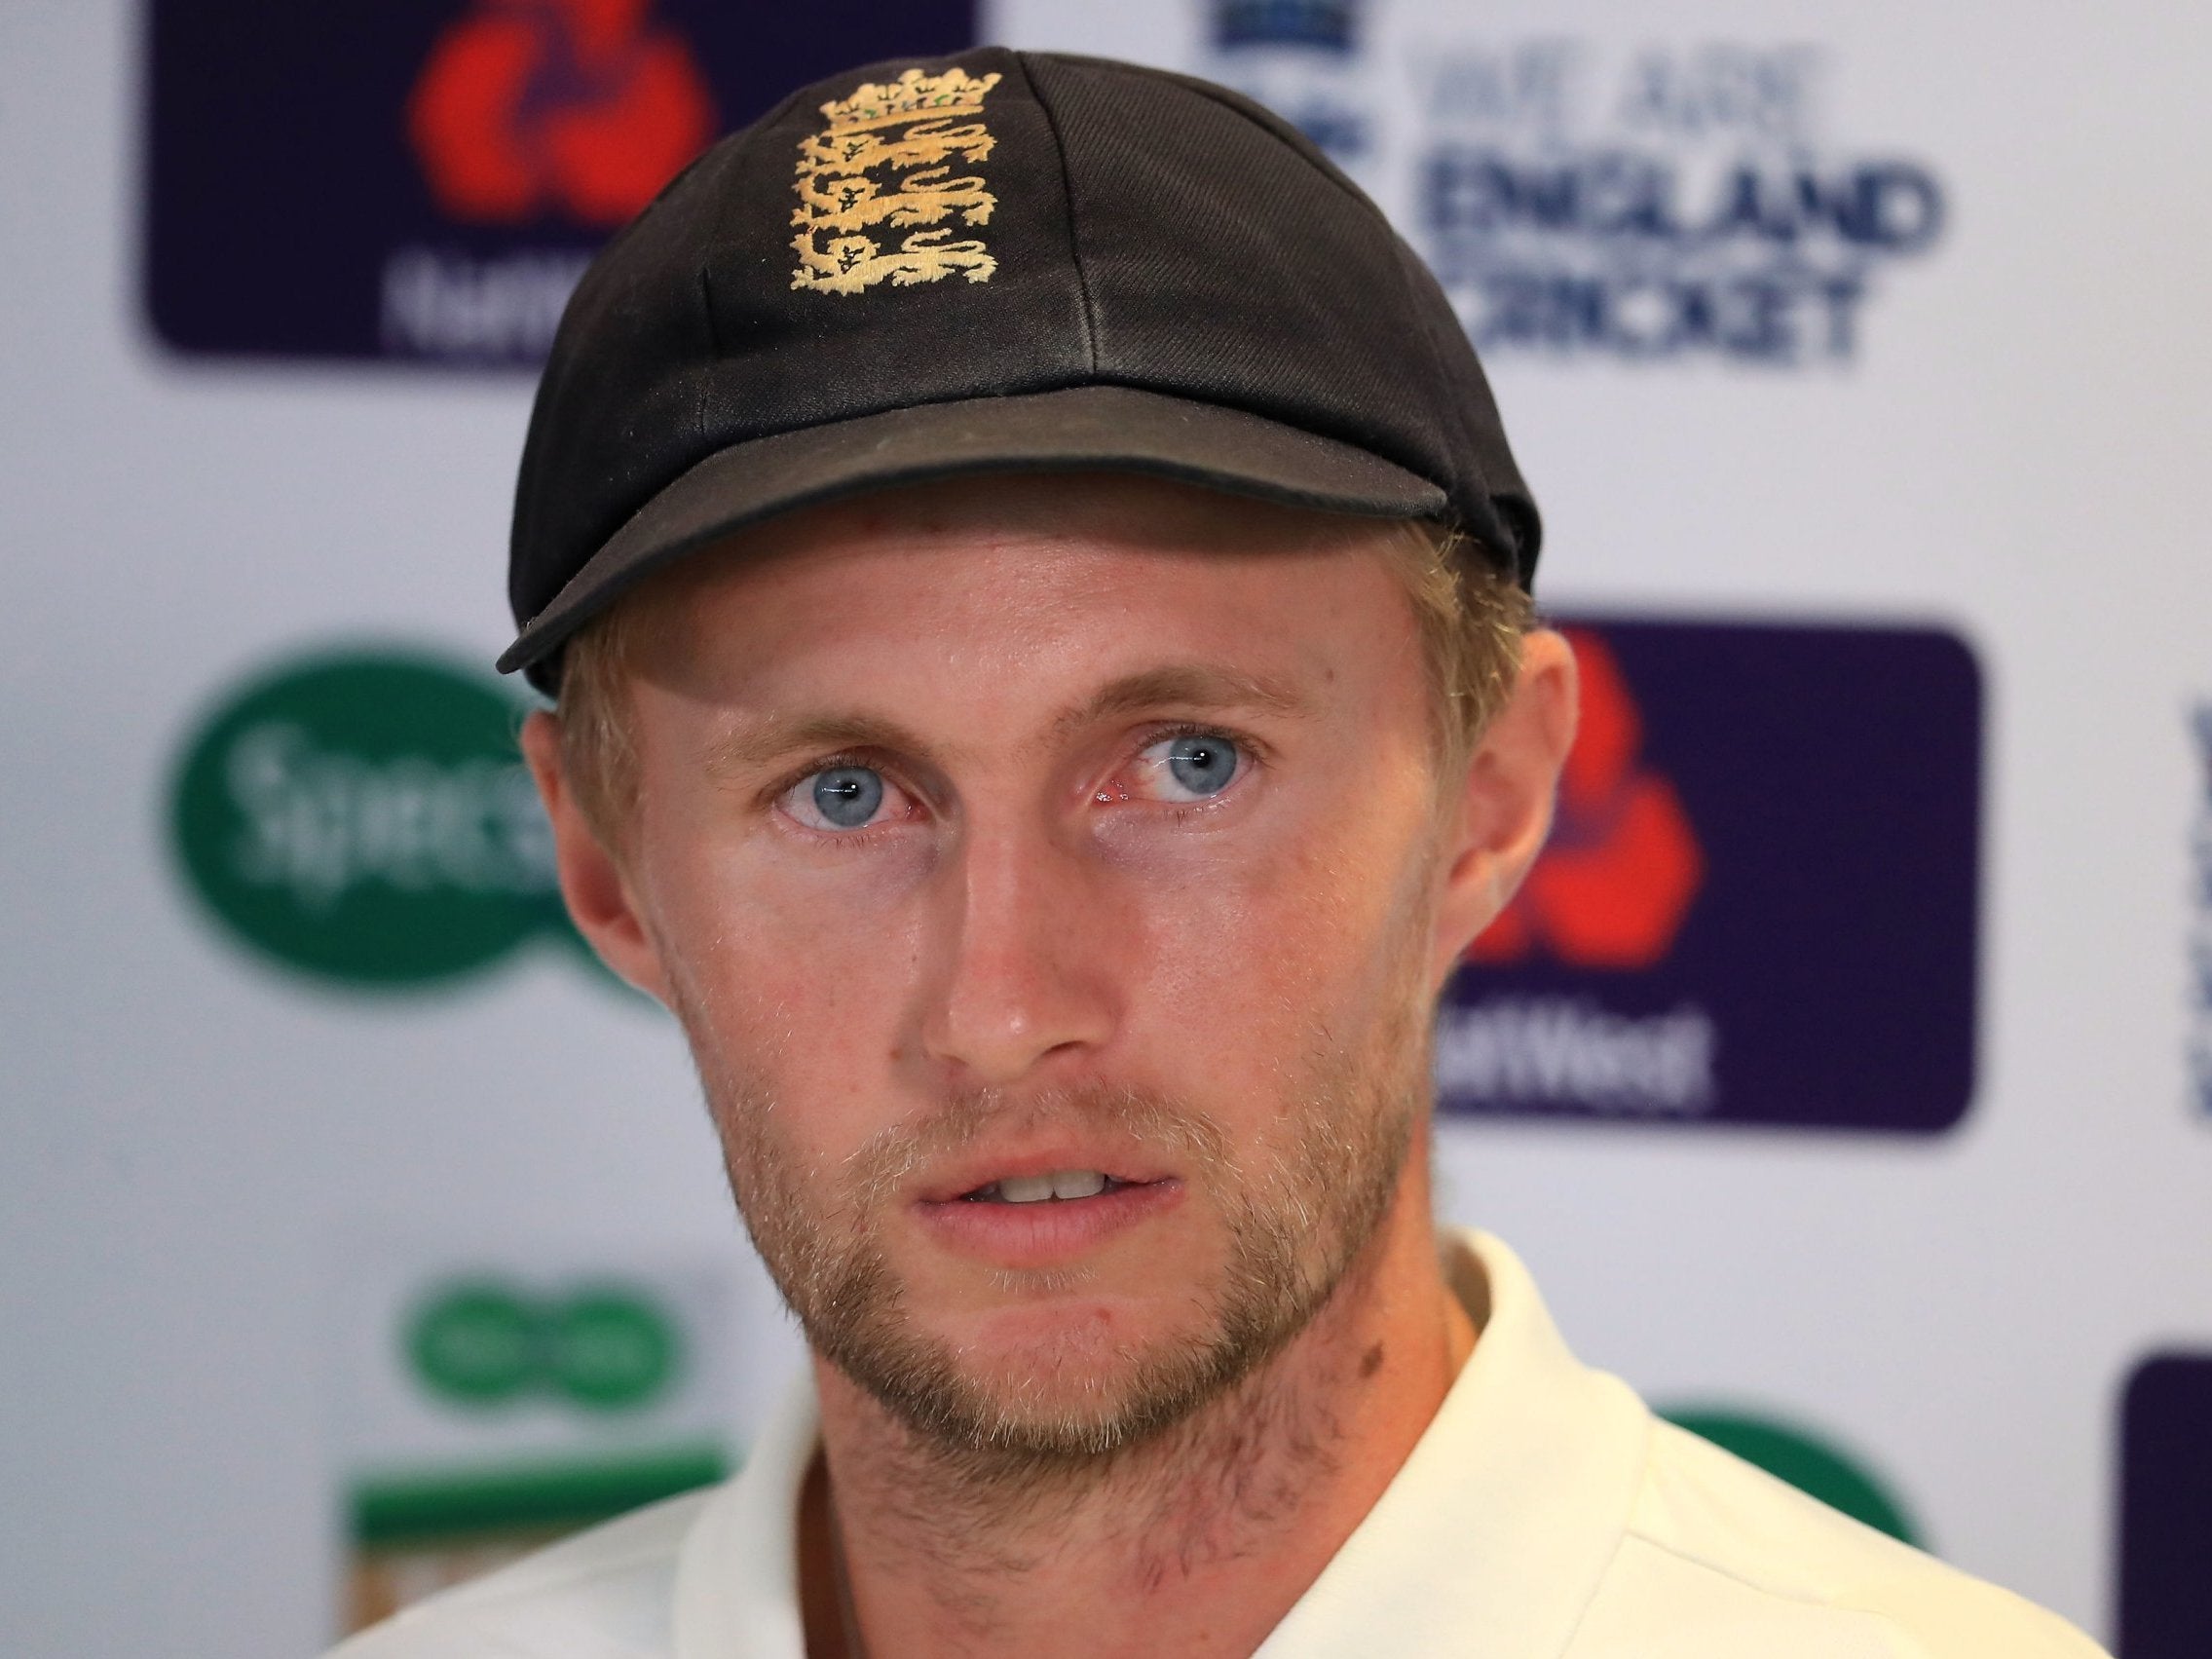 Joe Root made the final call to bring Adil Rashid back into the England test team